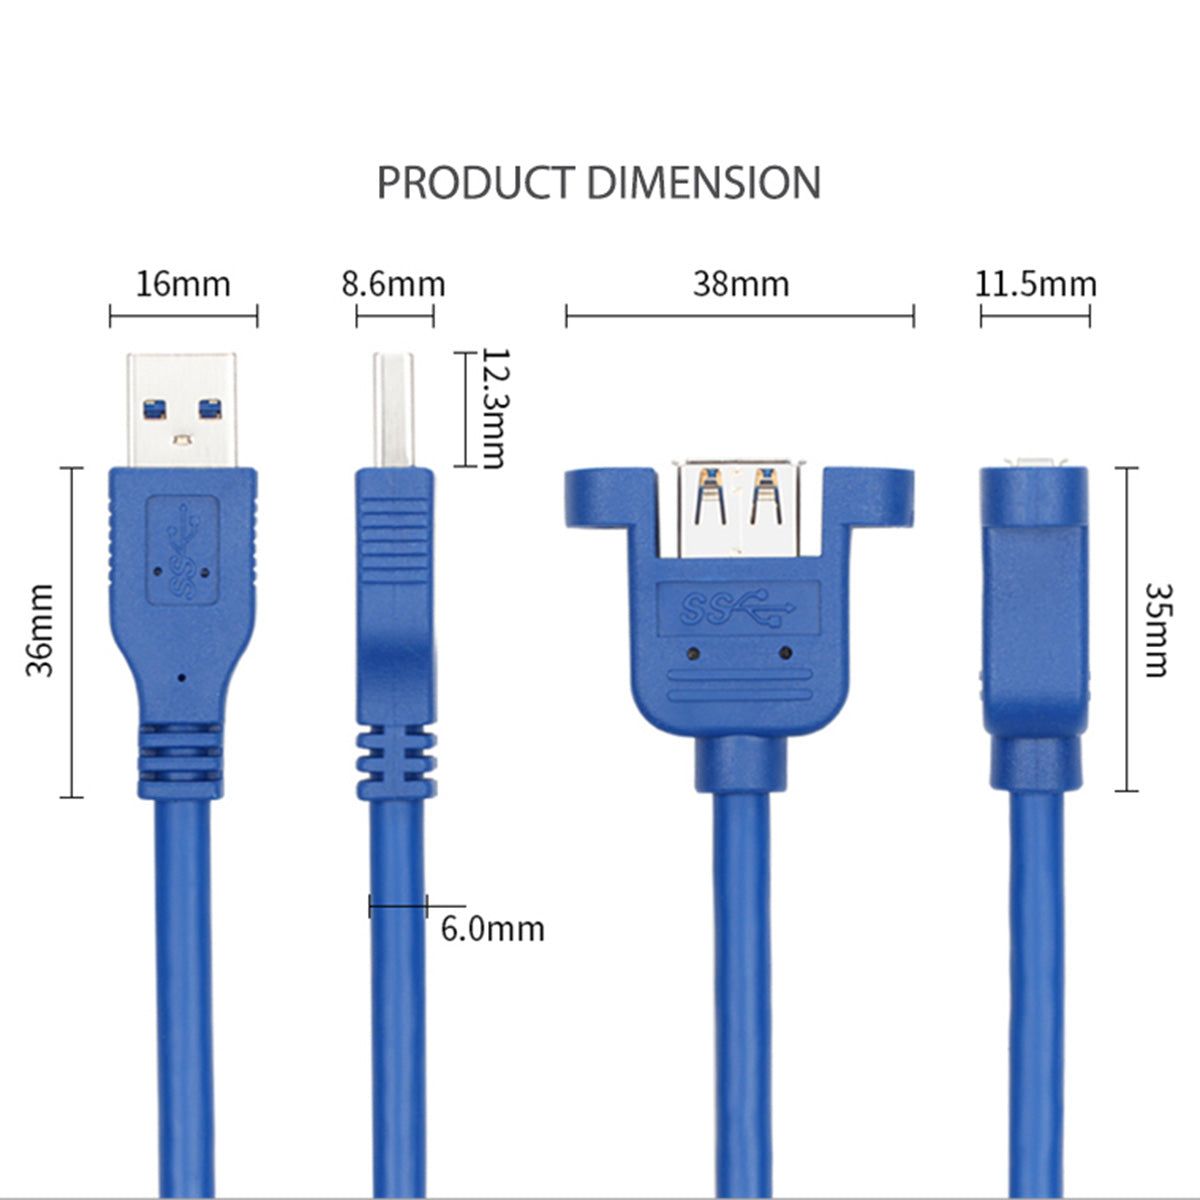 0.3m USB 3.0 Male to Female Extension Cable with Screw Hole Lock Panel Mount Cable for PC Laptop - UNIQKART